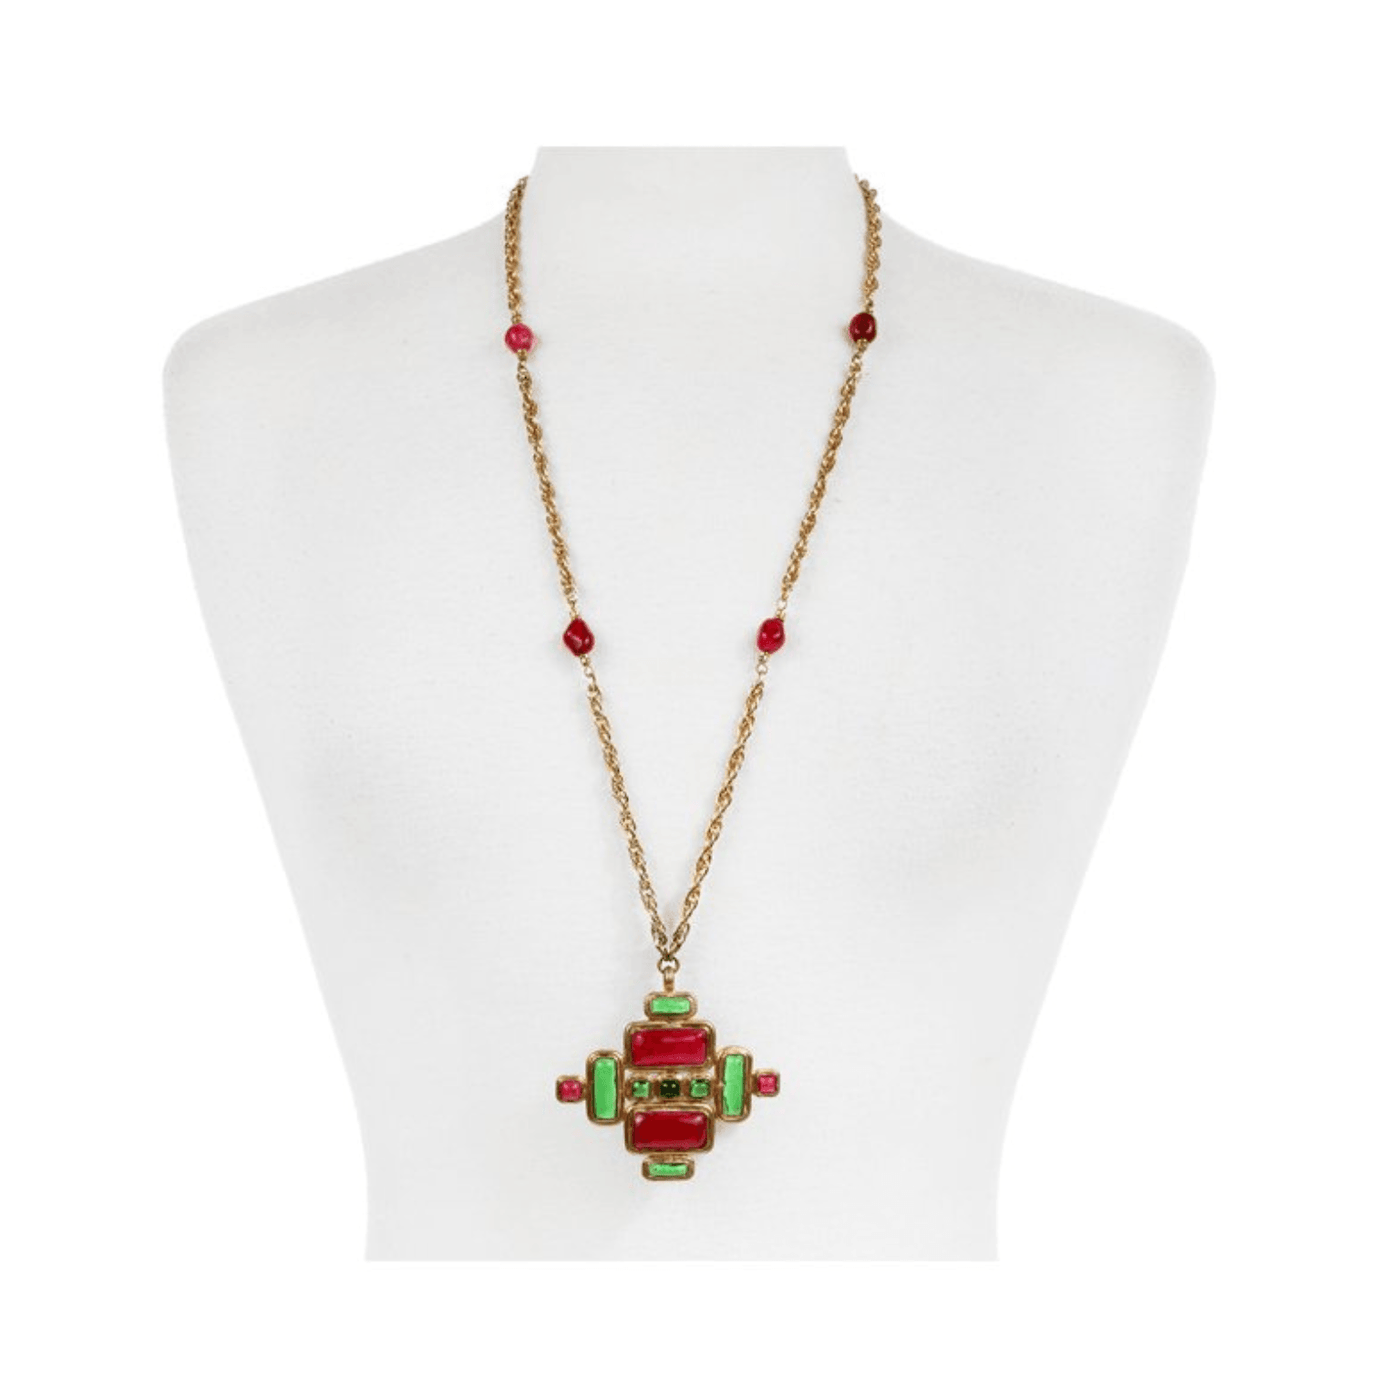 Chanel Red and Green Gripoix Cross Necklace - Only Authentics